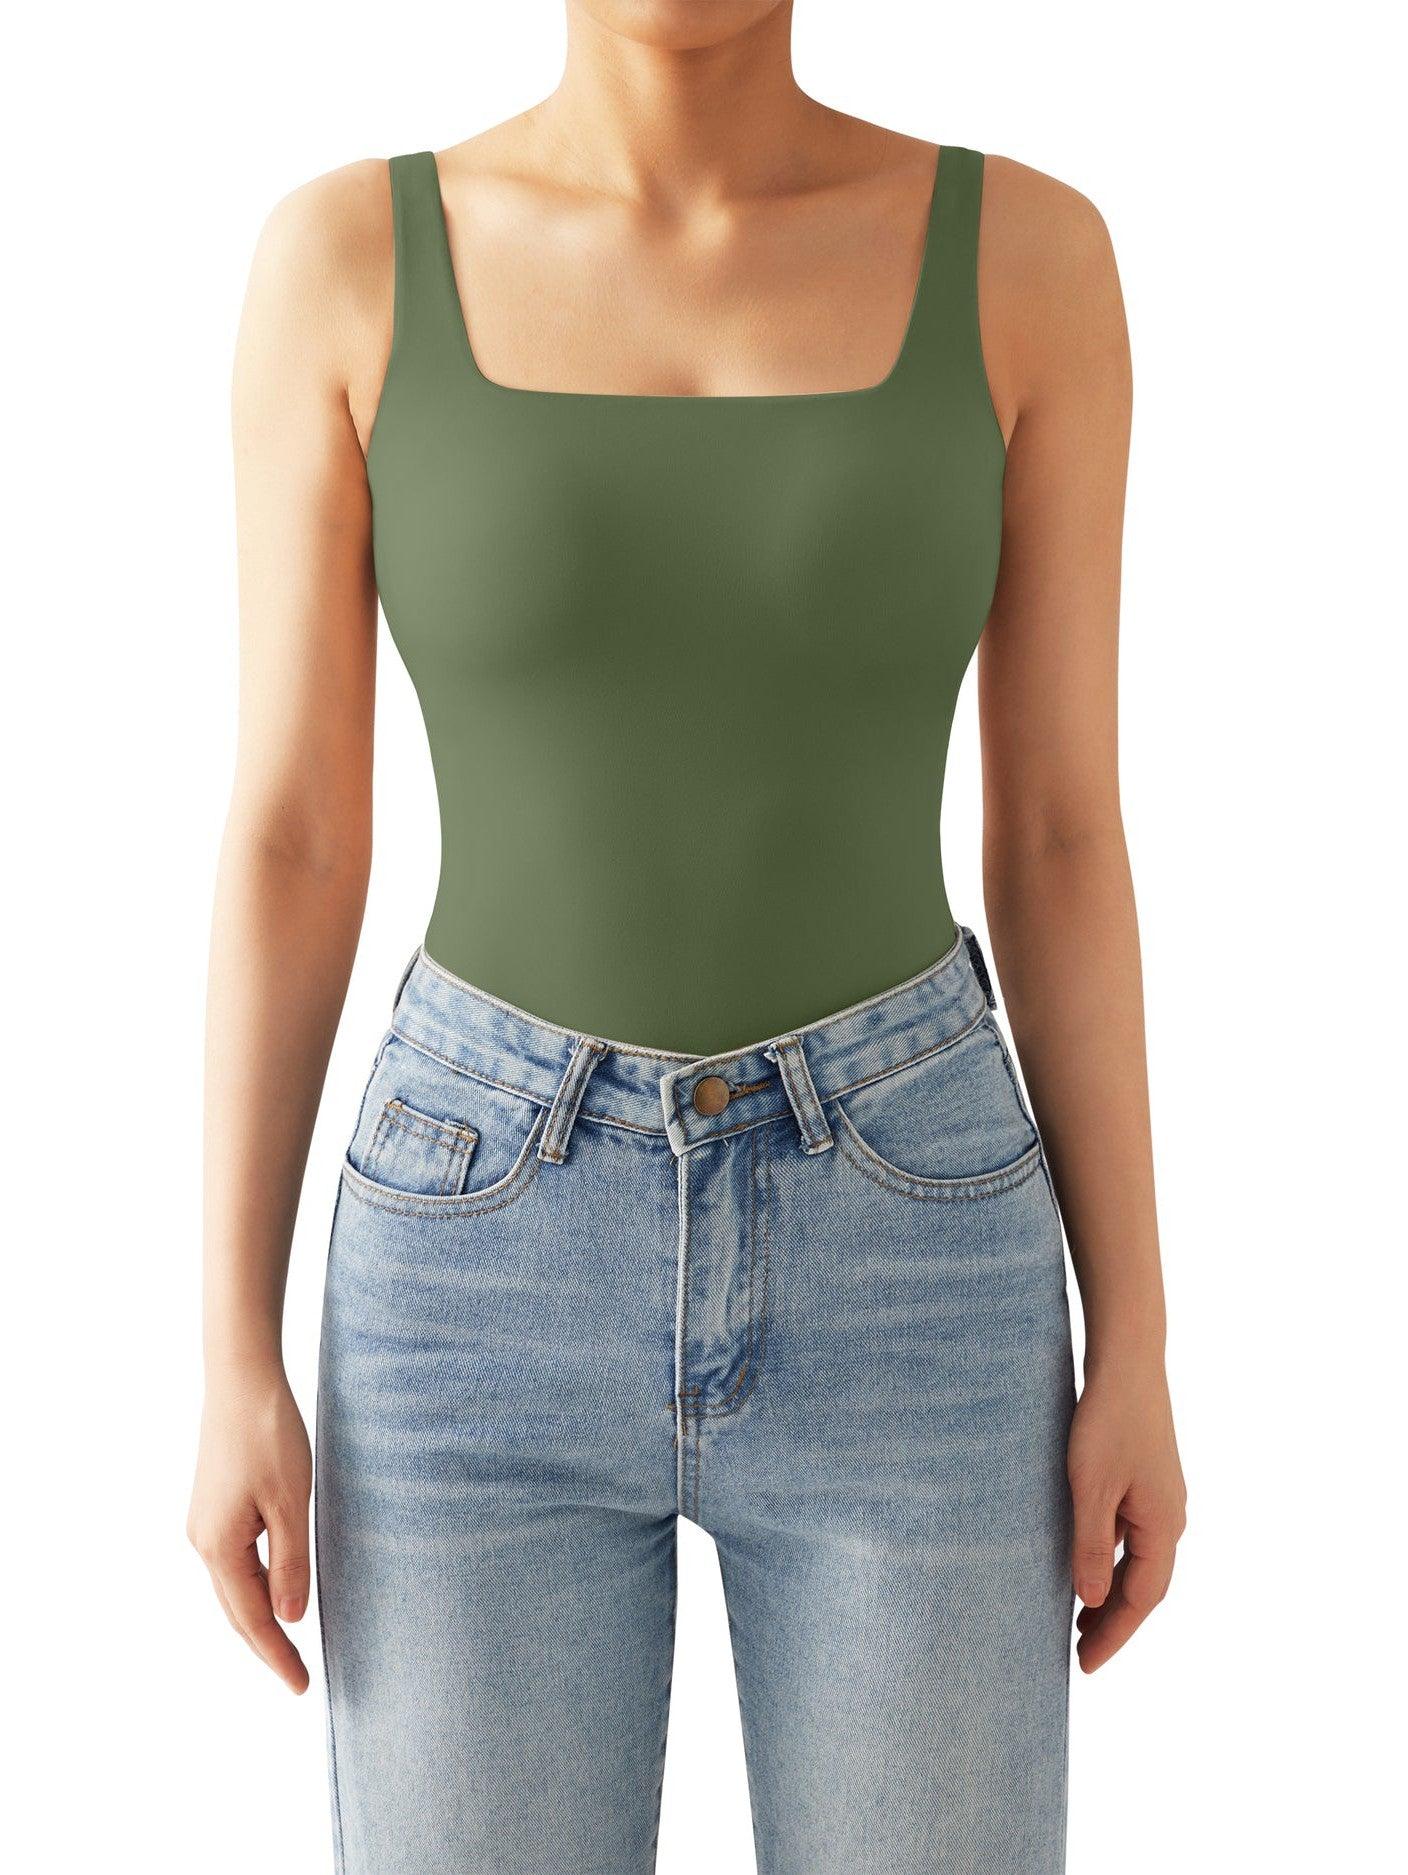 Buttery Soft Square Neck Bodysuit - SUUKSESS